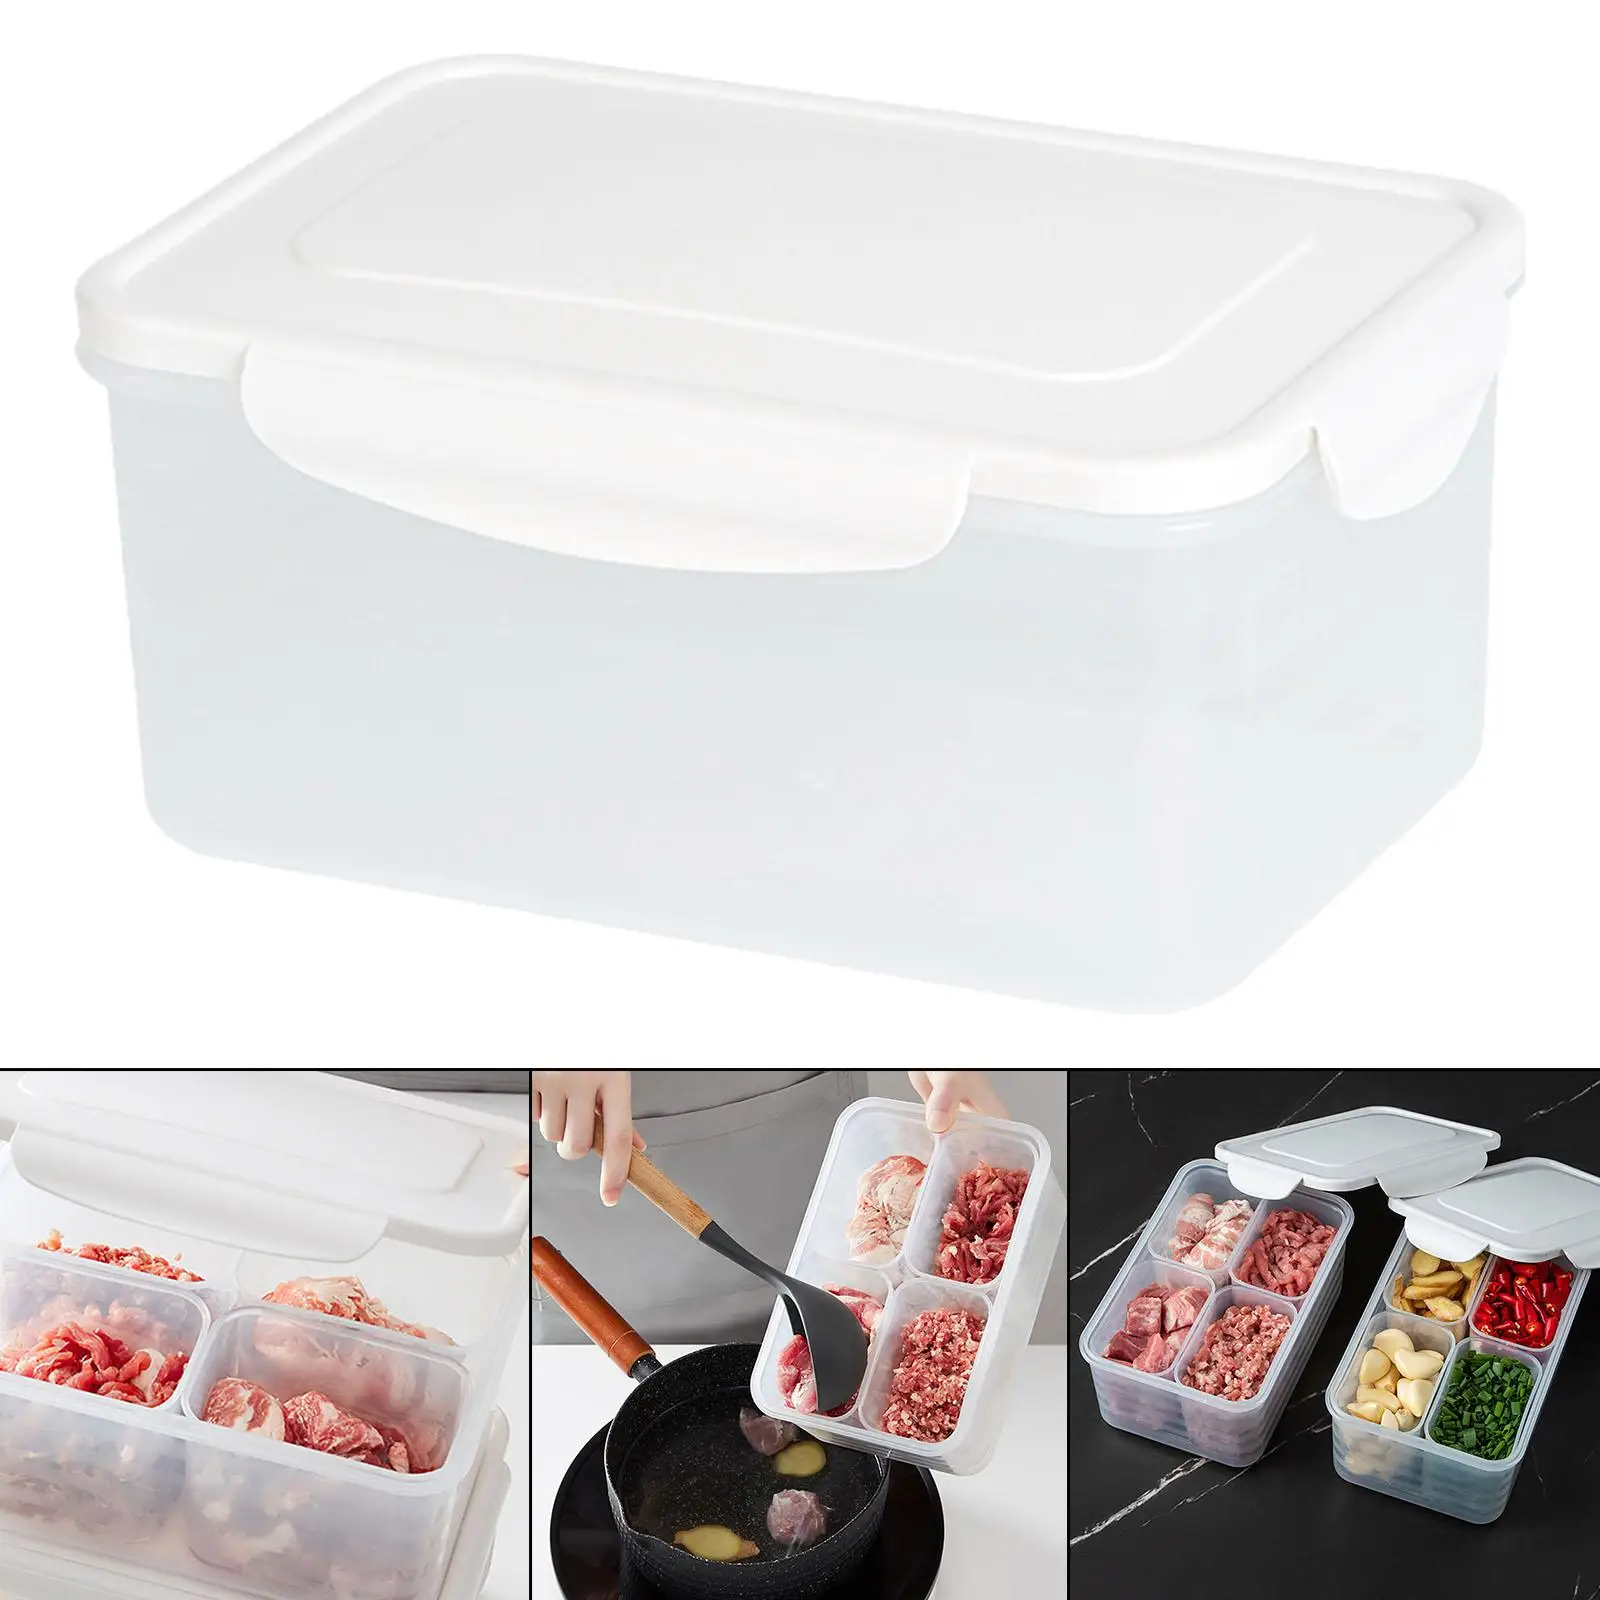 Household Food Storage Organizer Multipurpose with Lid Refrigerator Bins Leakproof for Drawer Fridge Shelves Pantry Cabinets